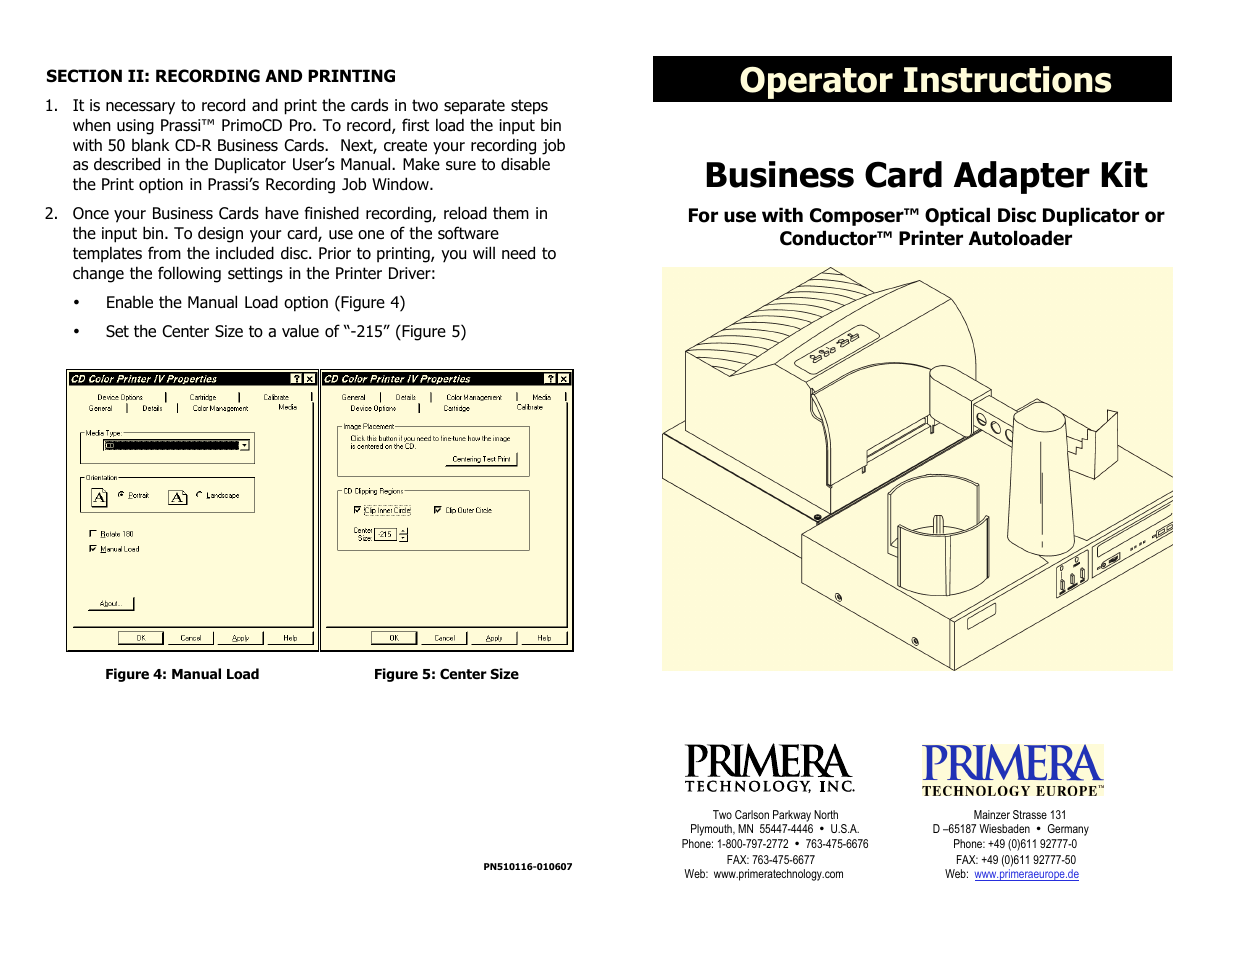 Business Card Adapter Kit